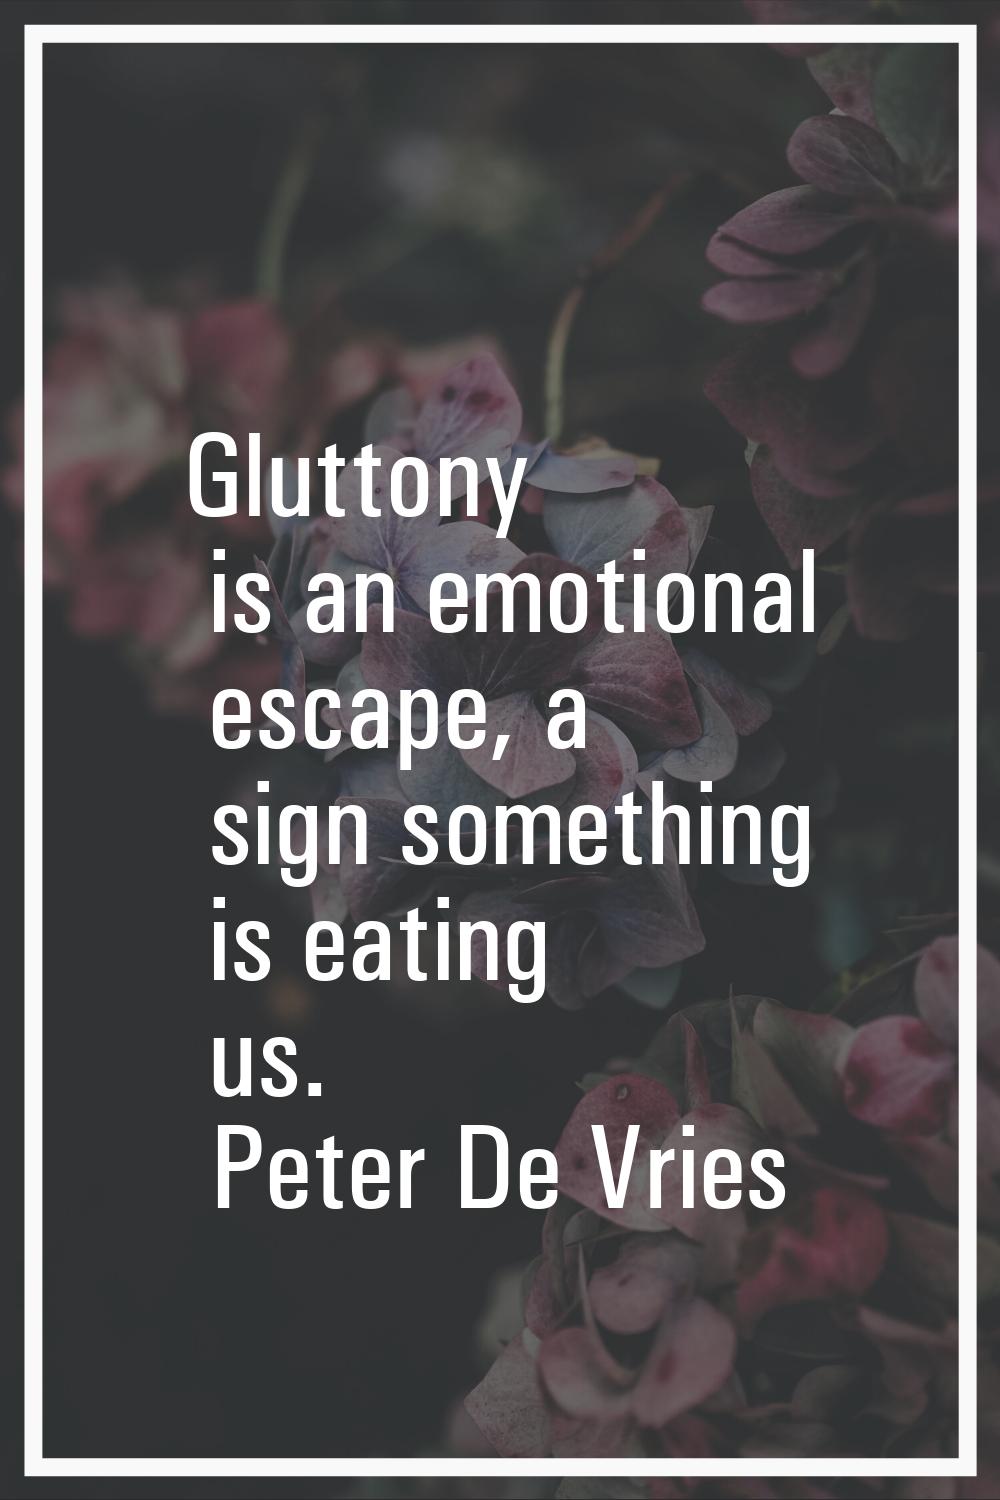 Gluttony is an emotional escape, a sign something is eating us.